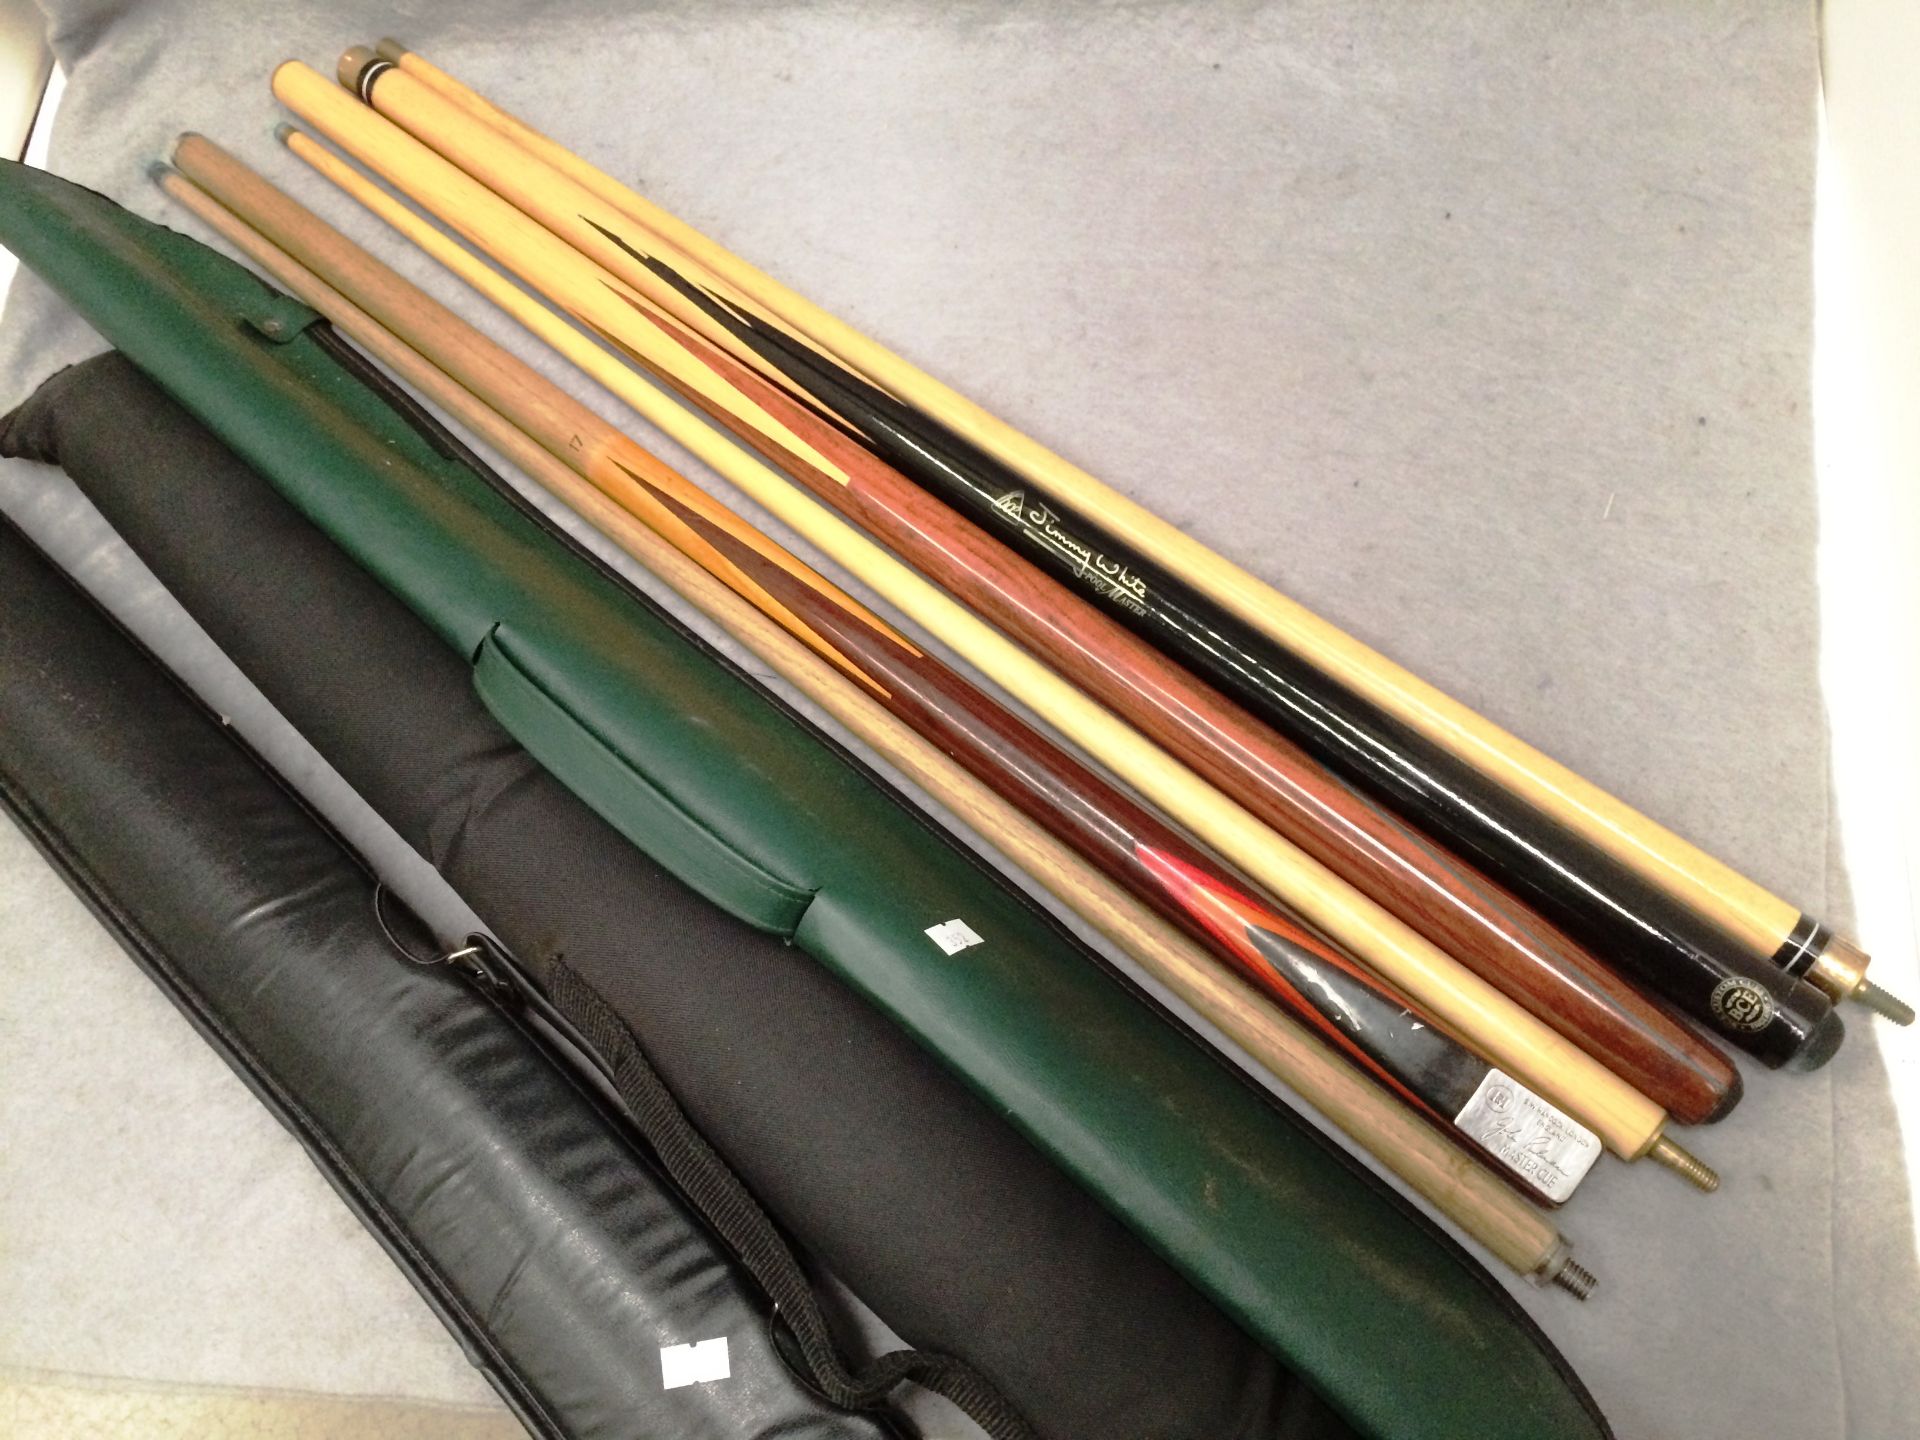 Three two piece pool/snooker cues - one BCE with Jimmy White facsimile signature,